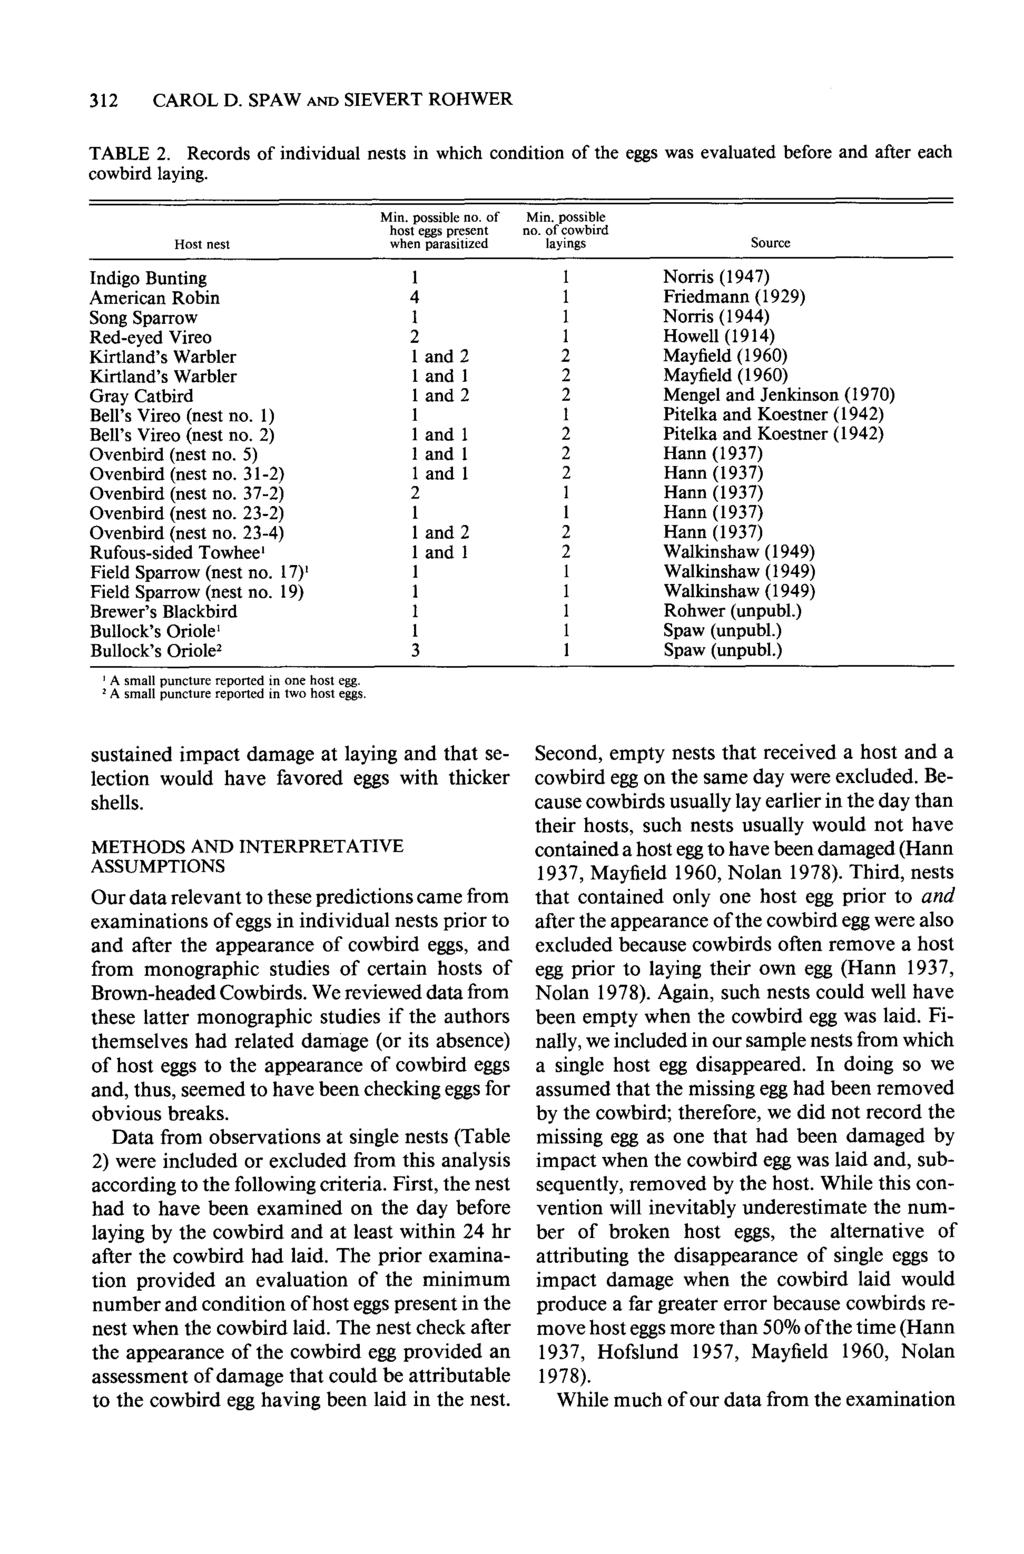 312 CAROL D. SPAW AND SIEVERT ROHWER TABLE 2. Records of individual nests in which condition of the eggs was evaluated before and after each cowbird laying.